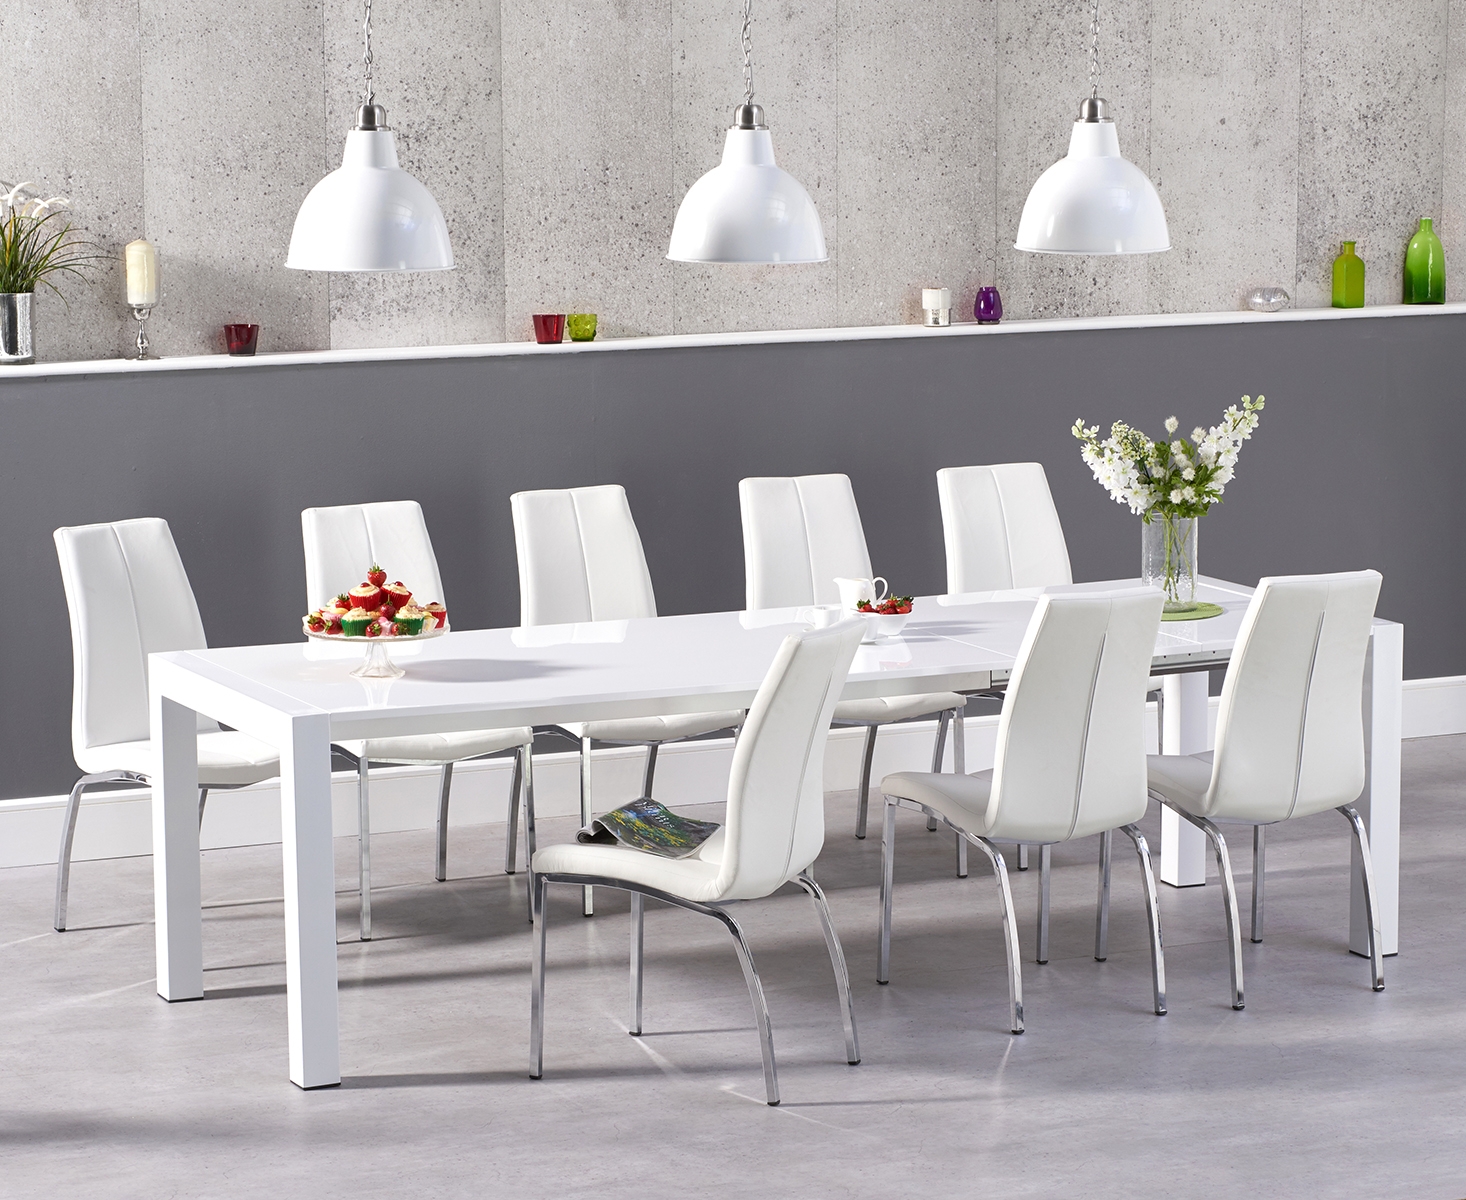 Extending Cleveland White High Gloss Dining Table With 8 Grey Marco Chairs